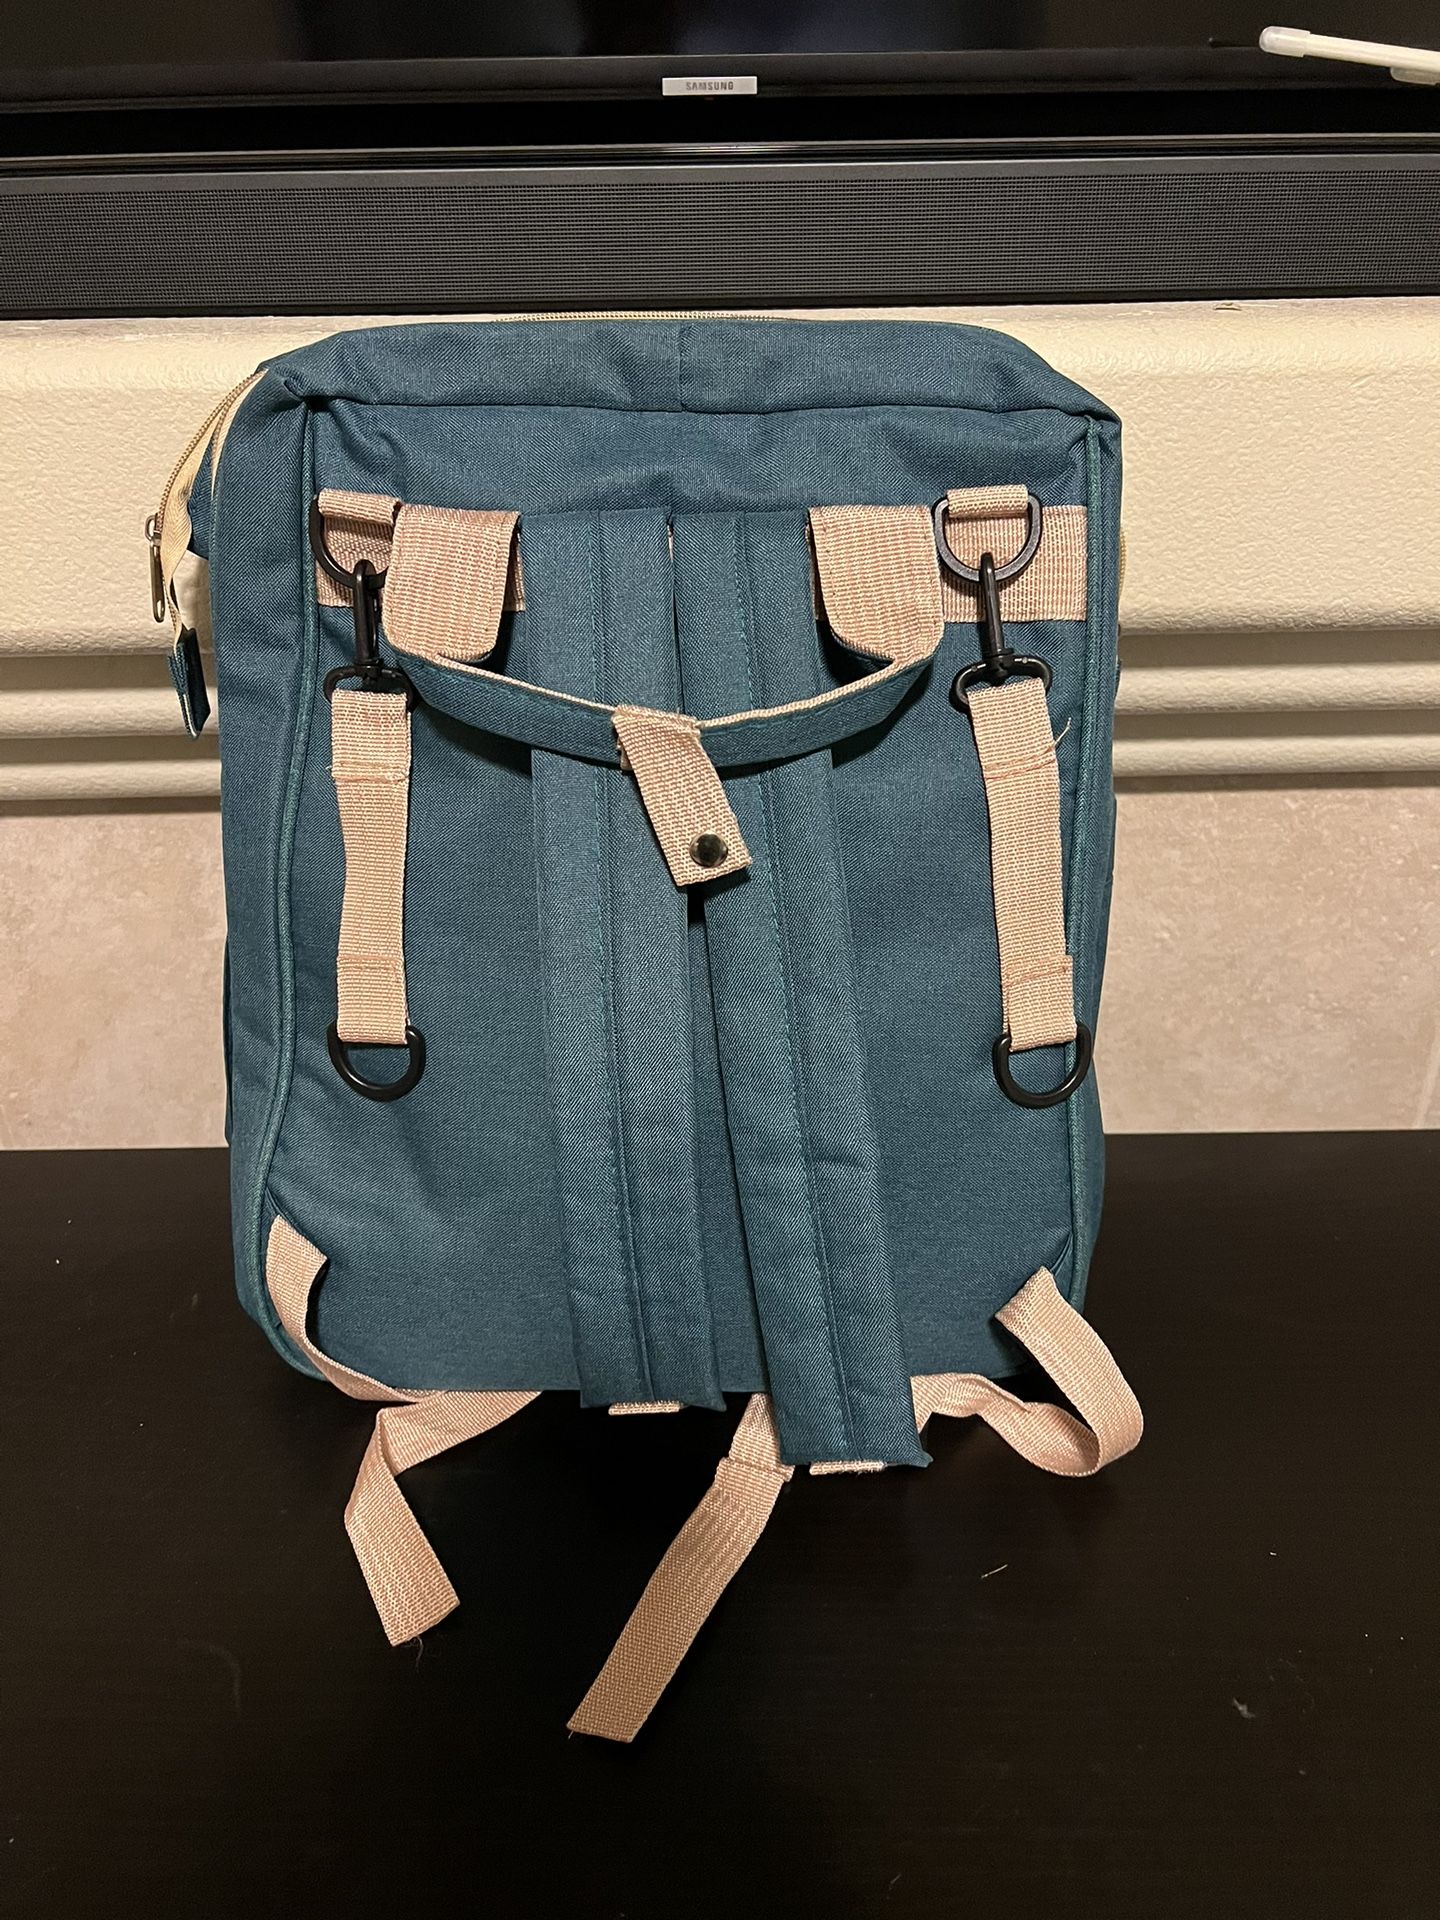 Super nice diaper bag and great condition. Brand new asking 30.